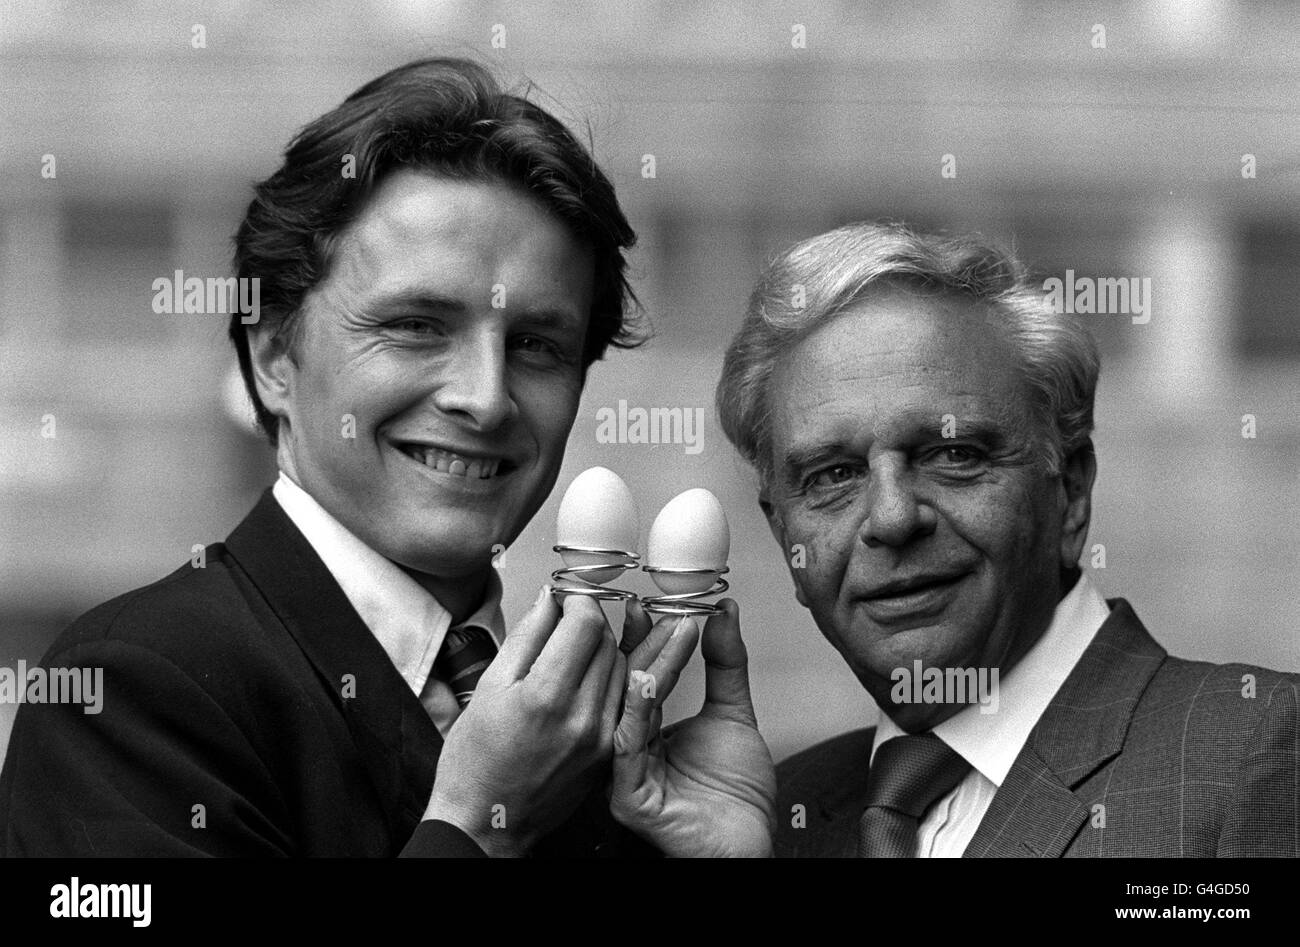 PA NEWS PHOTO 28/6/88 DESIGN GRADUATE NICK MUNRO GOES FOR A DOUBLE YOLK WITH REMINGTON SHAVER MILLIONAIRE VICTOR KIAM (RIGHT) IN LONDON. THE 25 YEAR ODL FROM CHESTER WAS CHOSE AS THE WINNER OF SHELL'S LIVEWIRE UK AWARD. NICK WAS VOTED THE COUNTRY'S TOP YOUNG ENTREPRENEUR AFTER SETTING UP A COMPANY PRODUCING SILVER-PLATED SPRING EGG CUPS, INSPIRED BY FINDING A RUSTY OLD SPRING IN HIS ATTIC Stock Photo